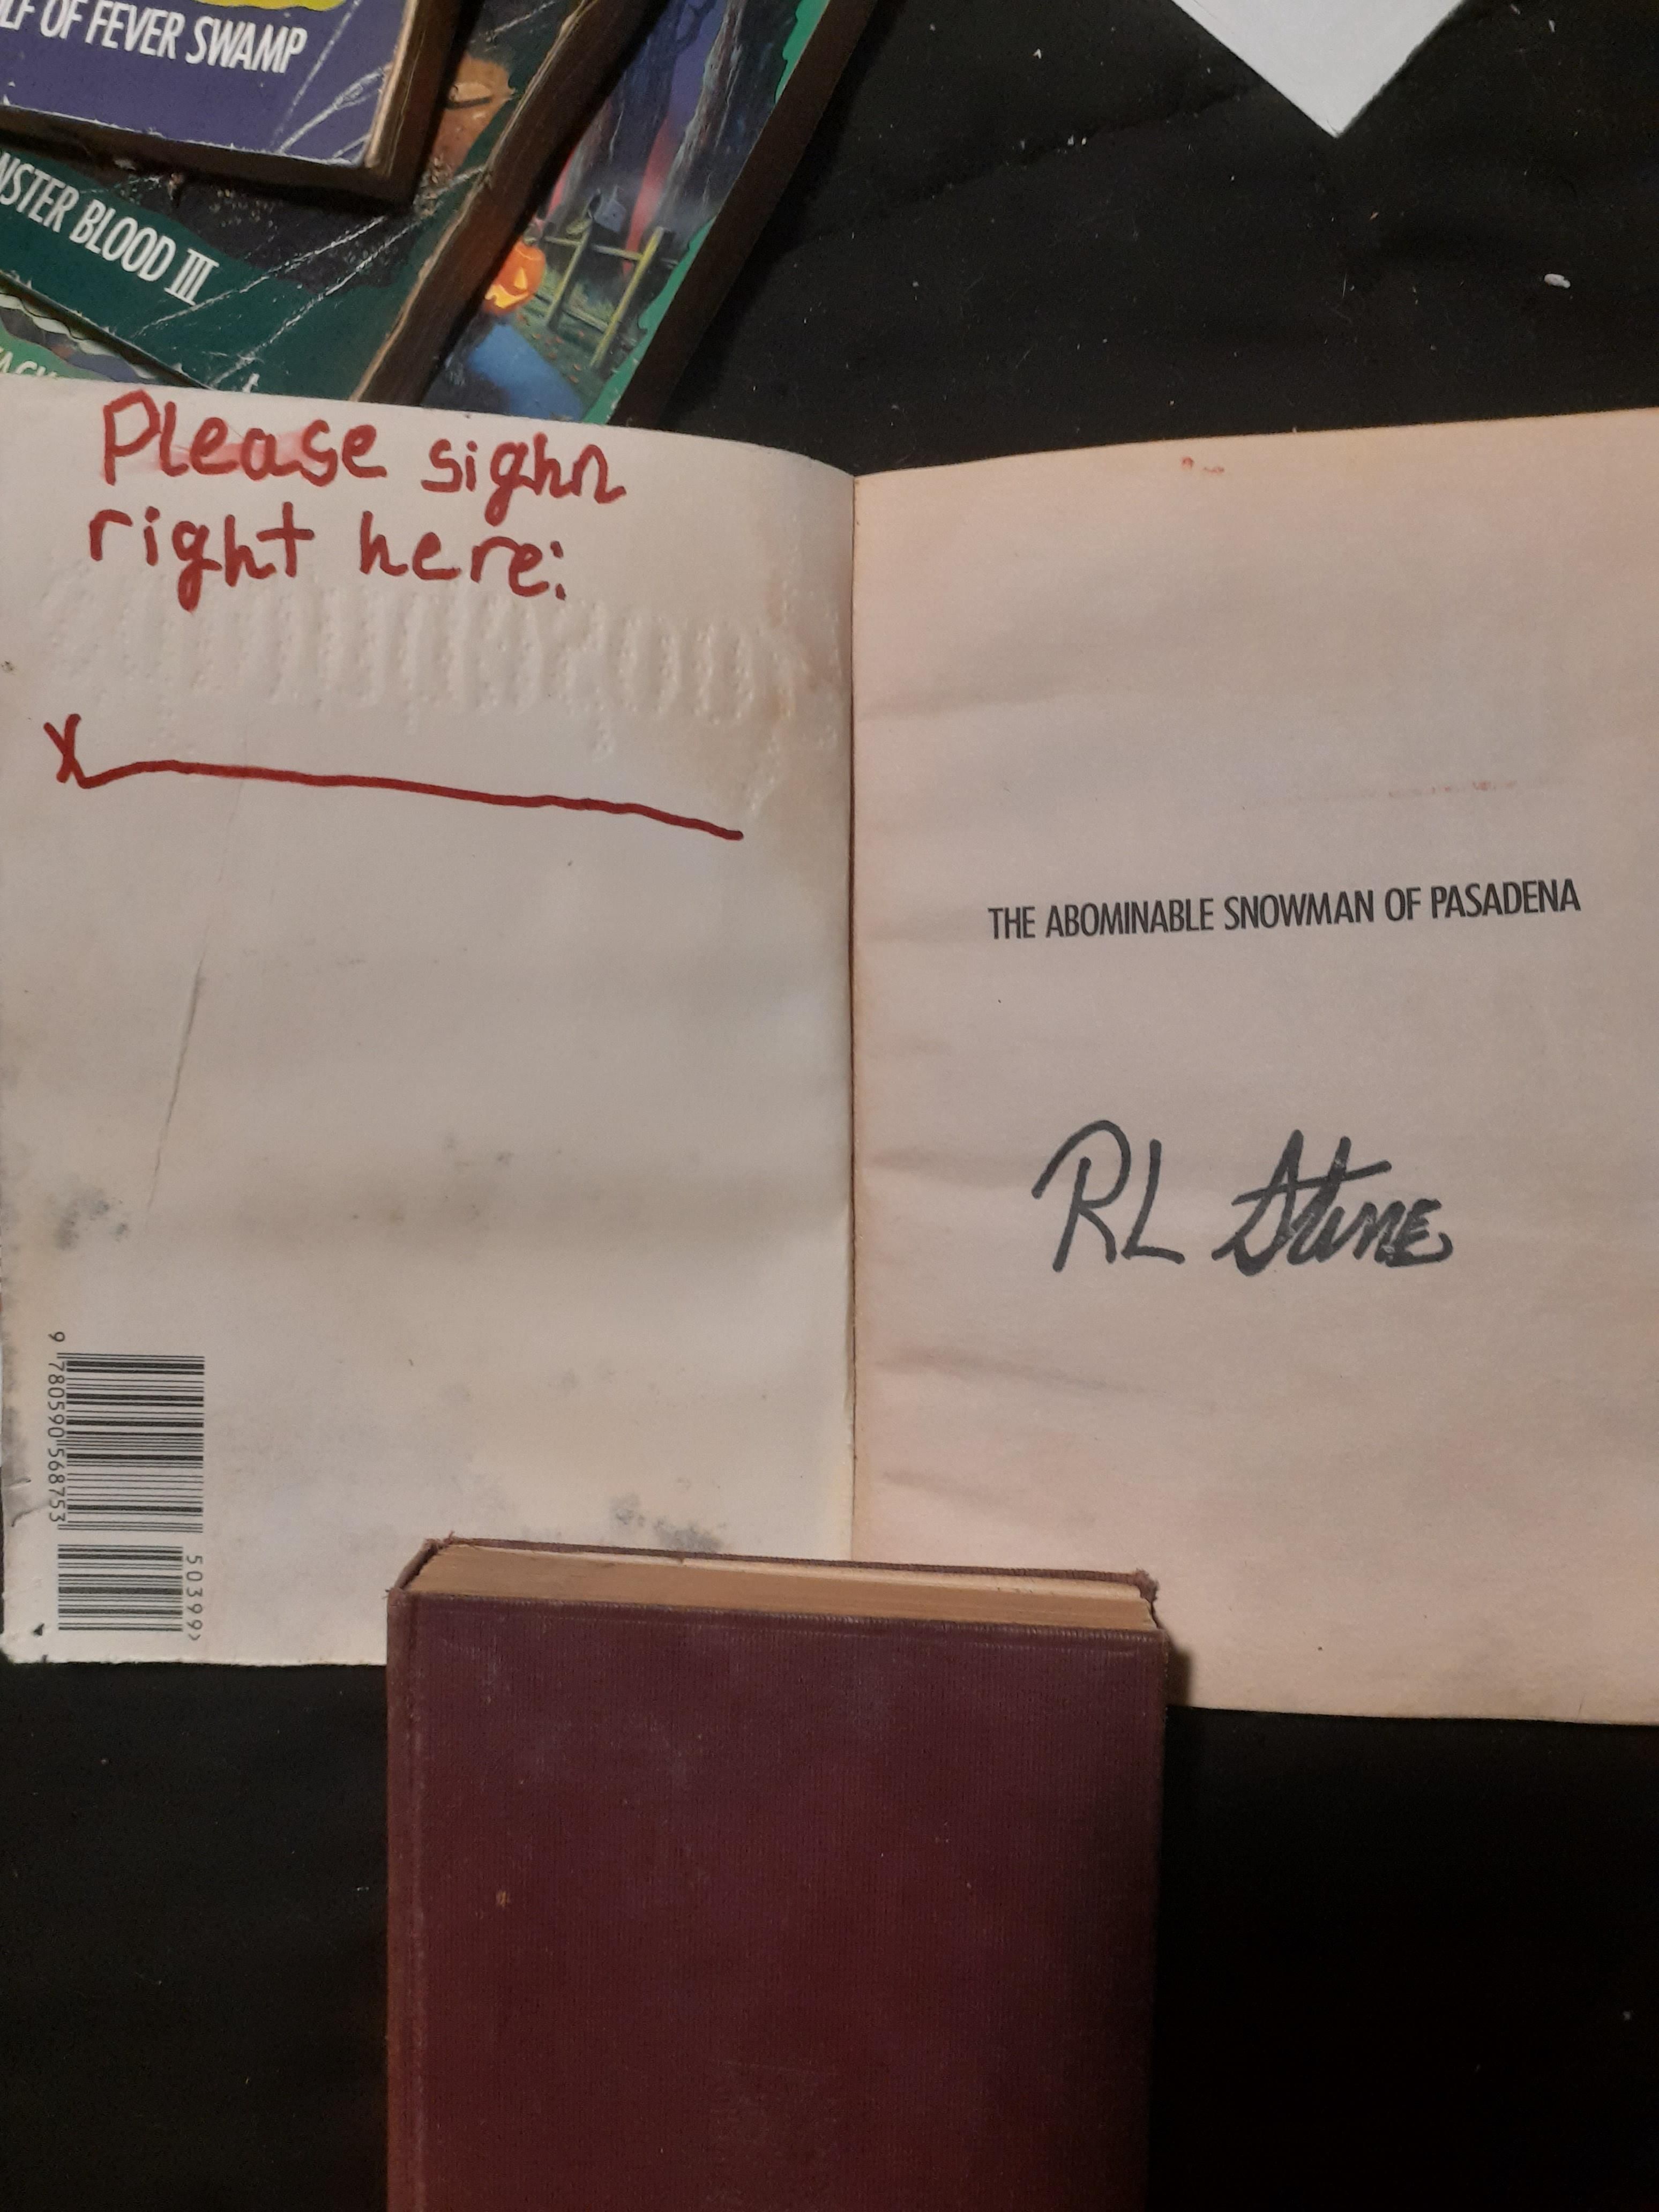 I would like to share with you all the time I was politely dissed by R.L. Stine. I was in 4th Grade and mailed my book to him to autograph.